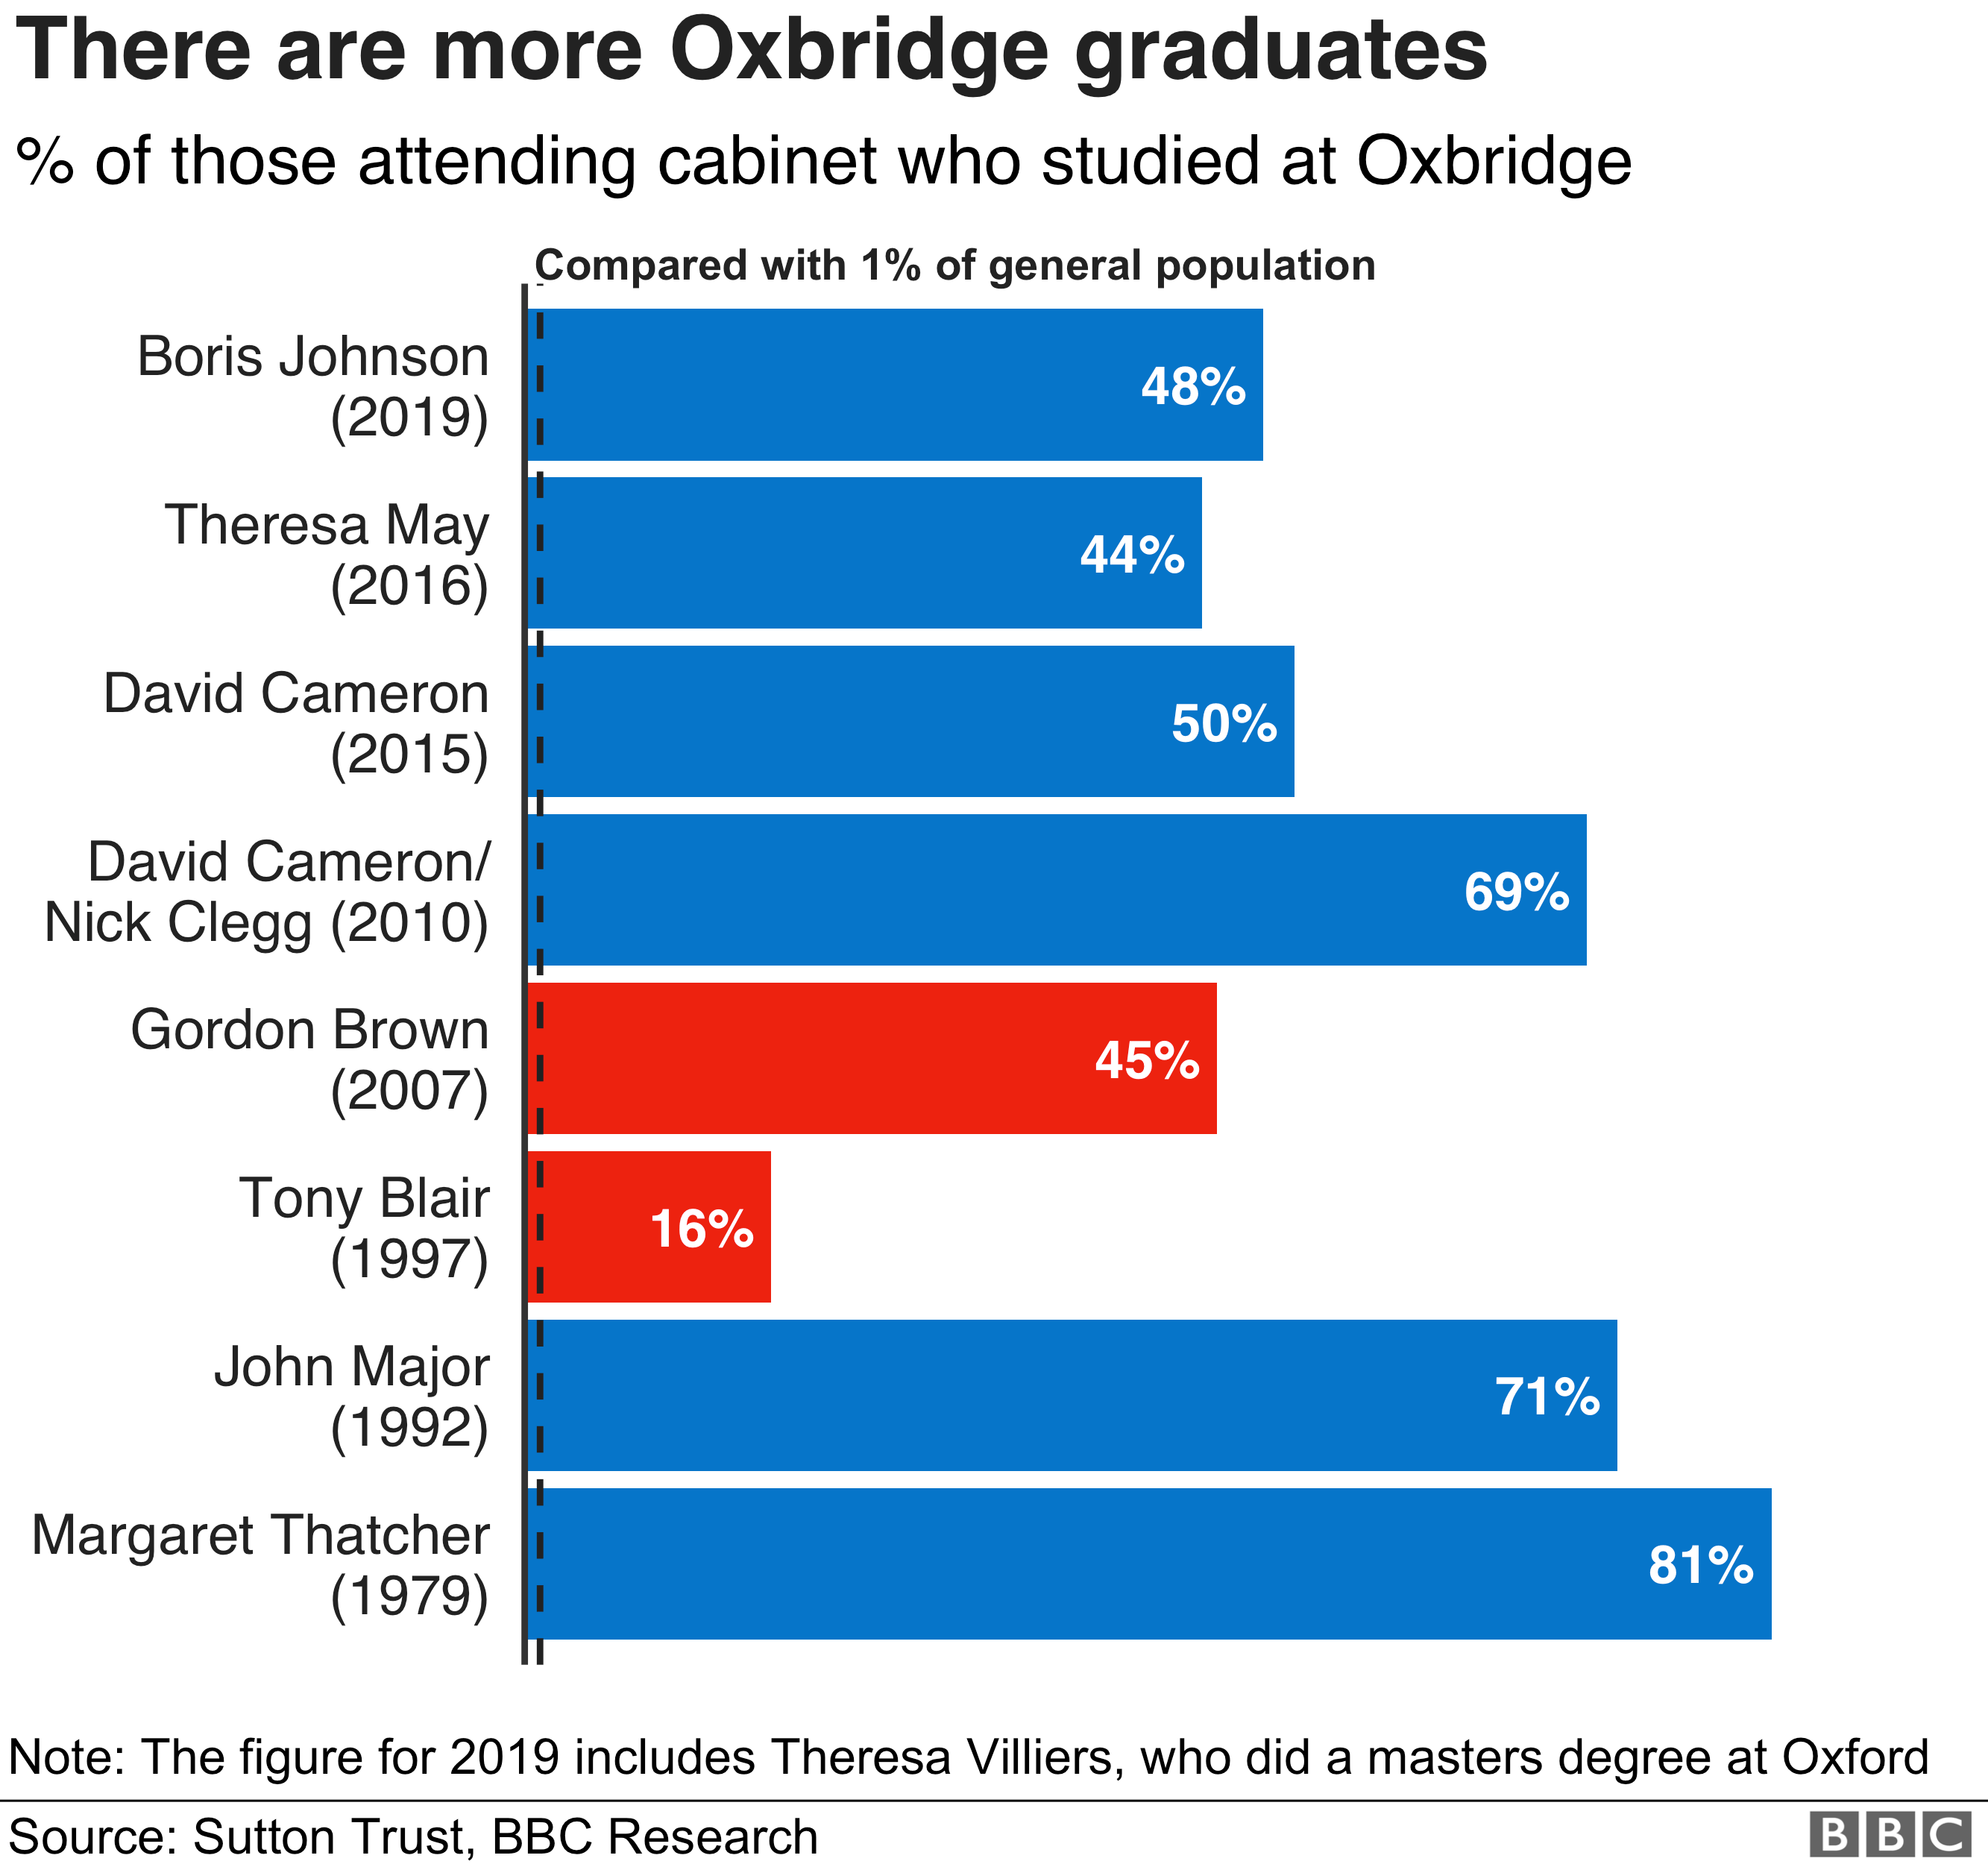 Chart showing the % of Oxbridge-educated members of cabinet from Thatcher to Johnson